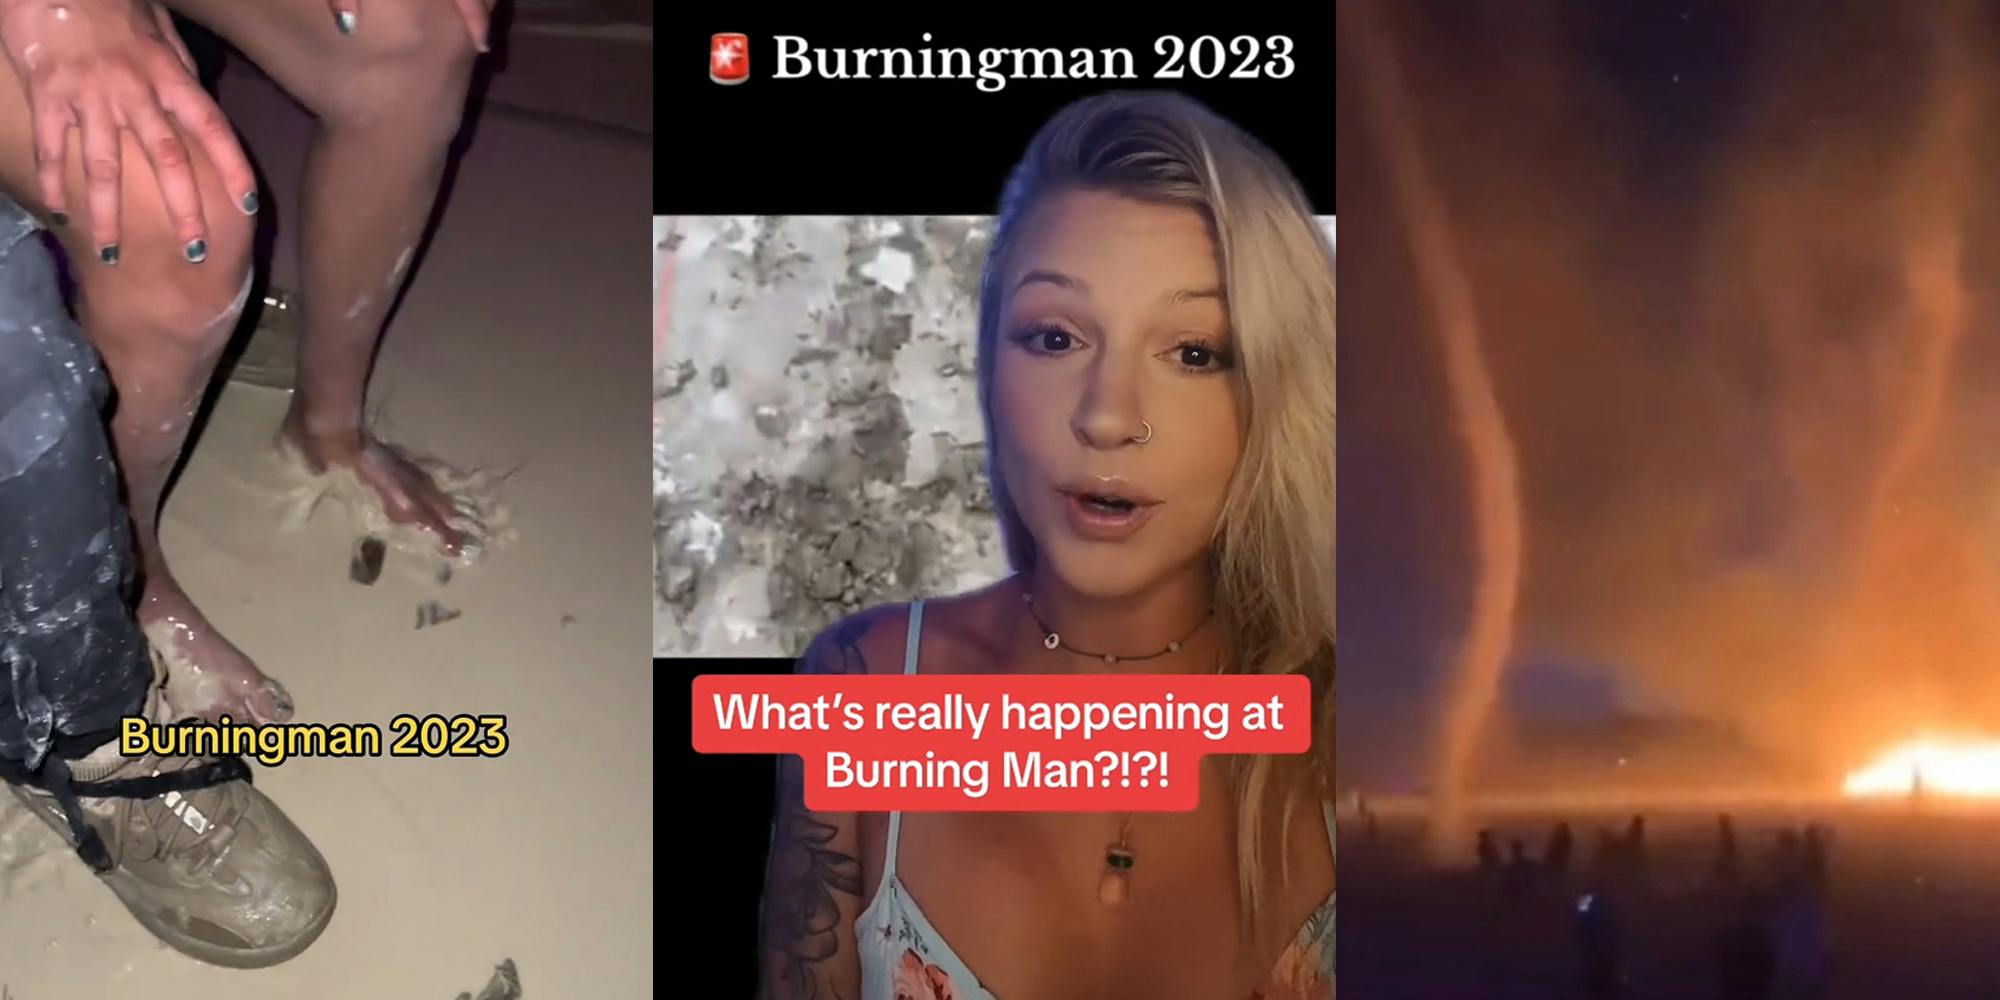 people with feet in flood water with caption "Burningman 2023" (l) woman greenscreen TikTok with caption "Burningman 2023 What's really happening at Burning Man?!?!" (c) Burningman attendees outside during odd weather (r)